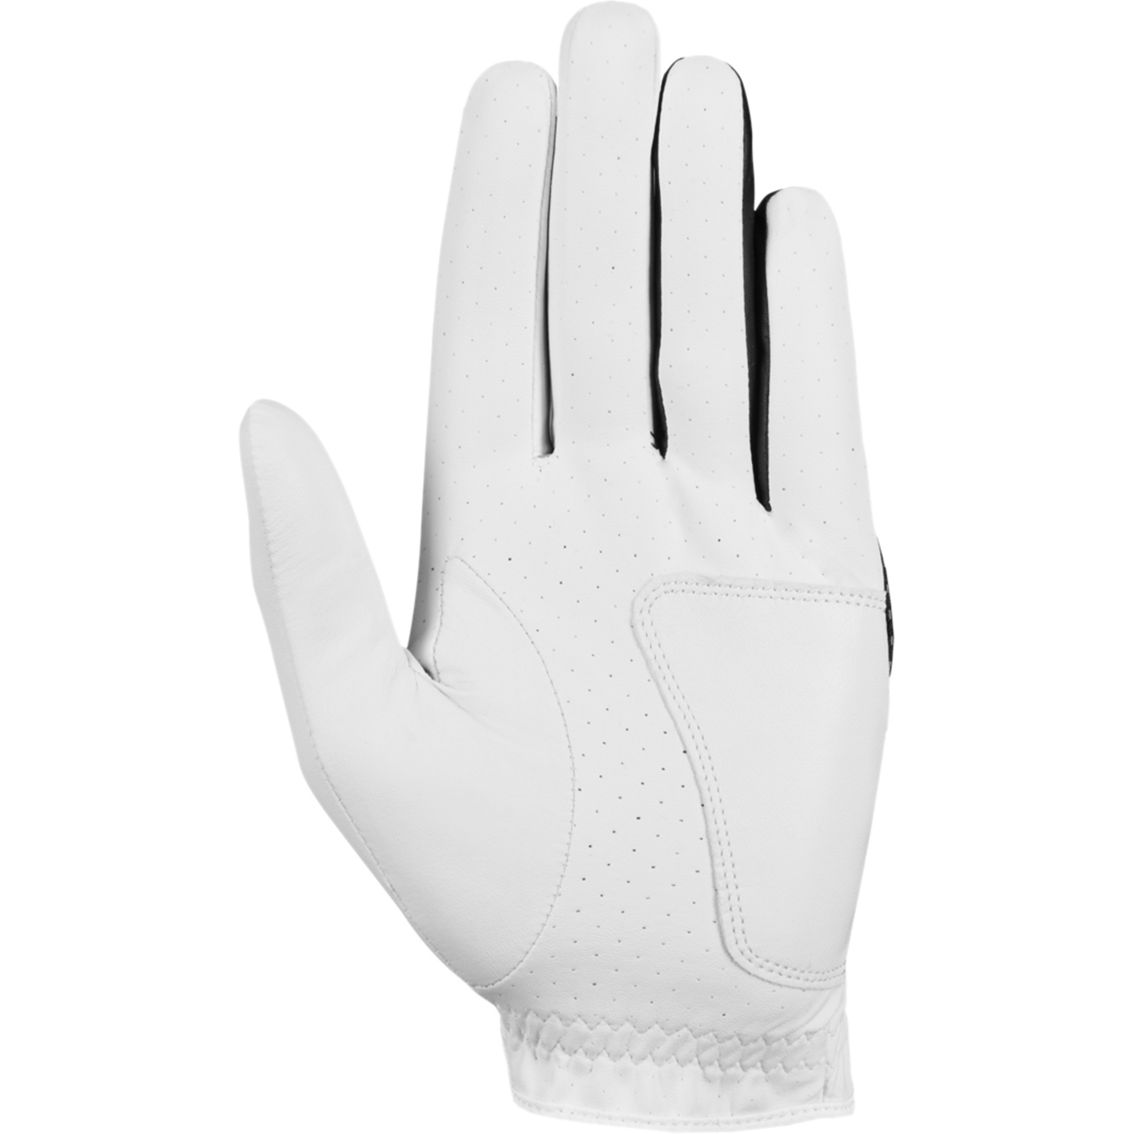 Callaway '23 Weather Spann Golf Gloves MLH Med 2 pk. - Image 2 of 2